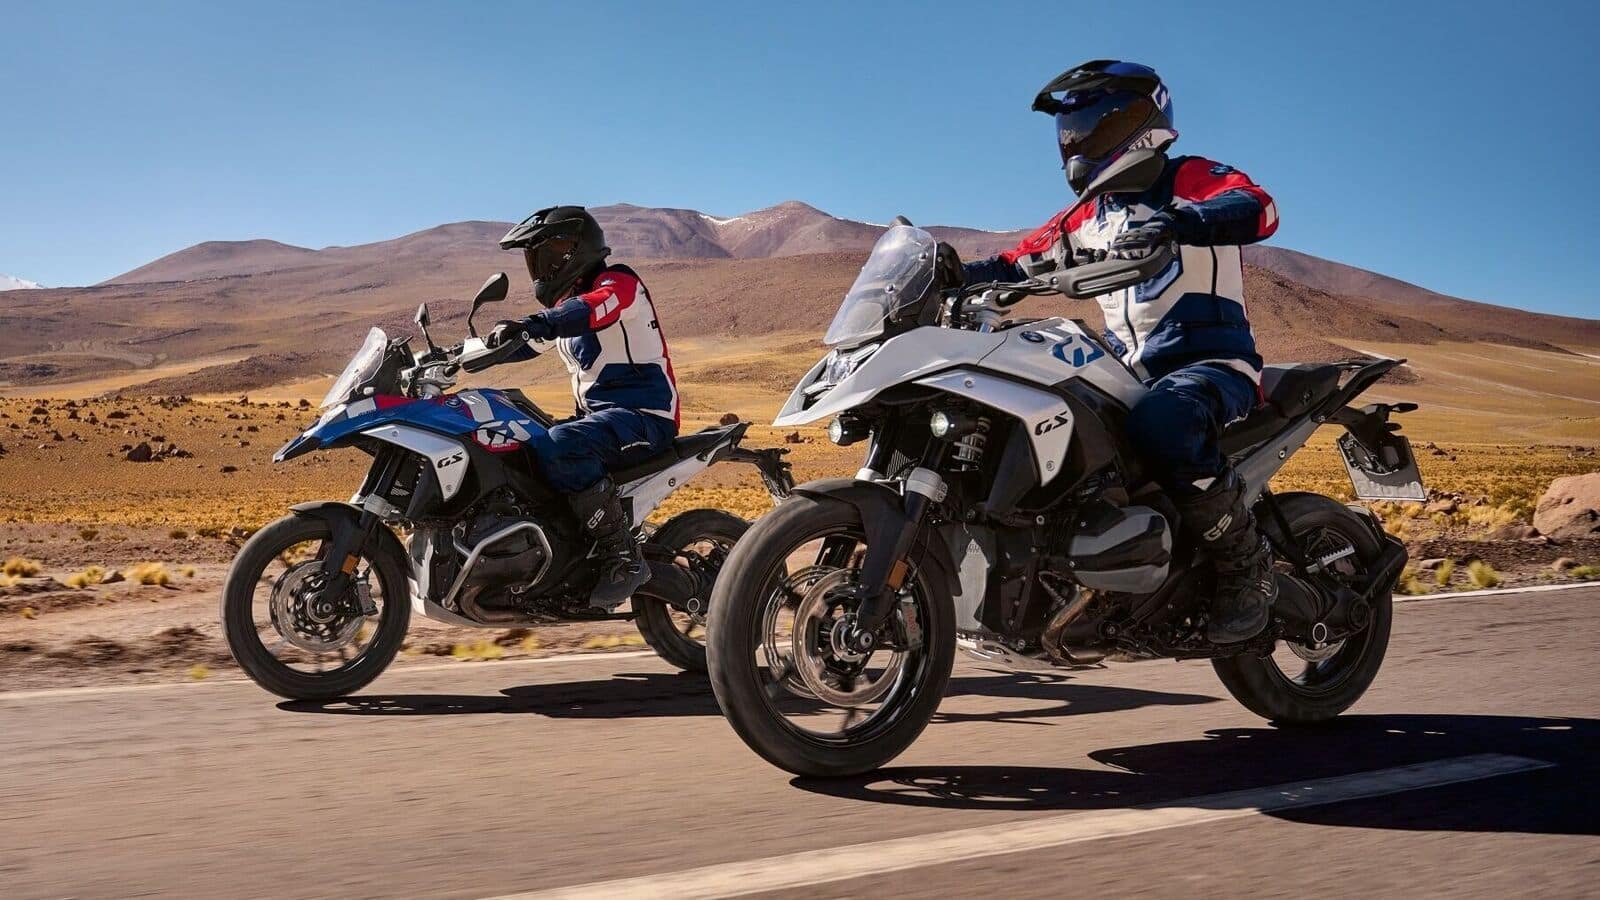 BMW R 1300 GS pre-bookings open in India via dealerships